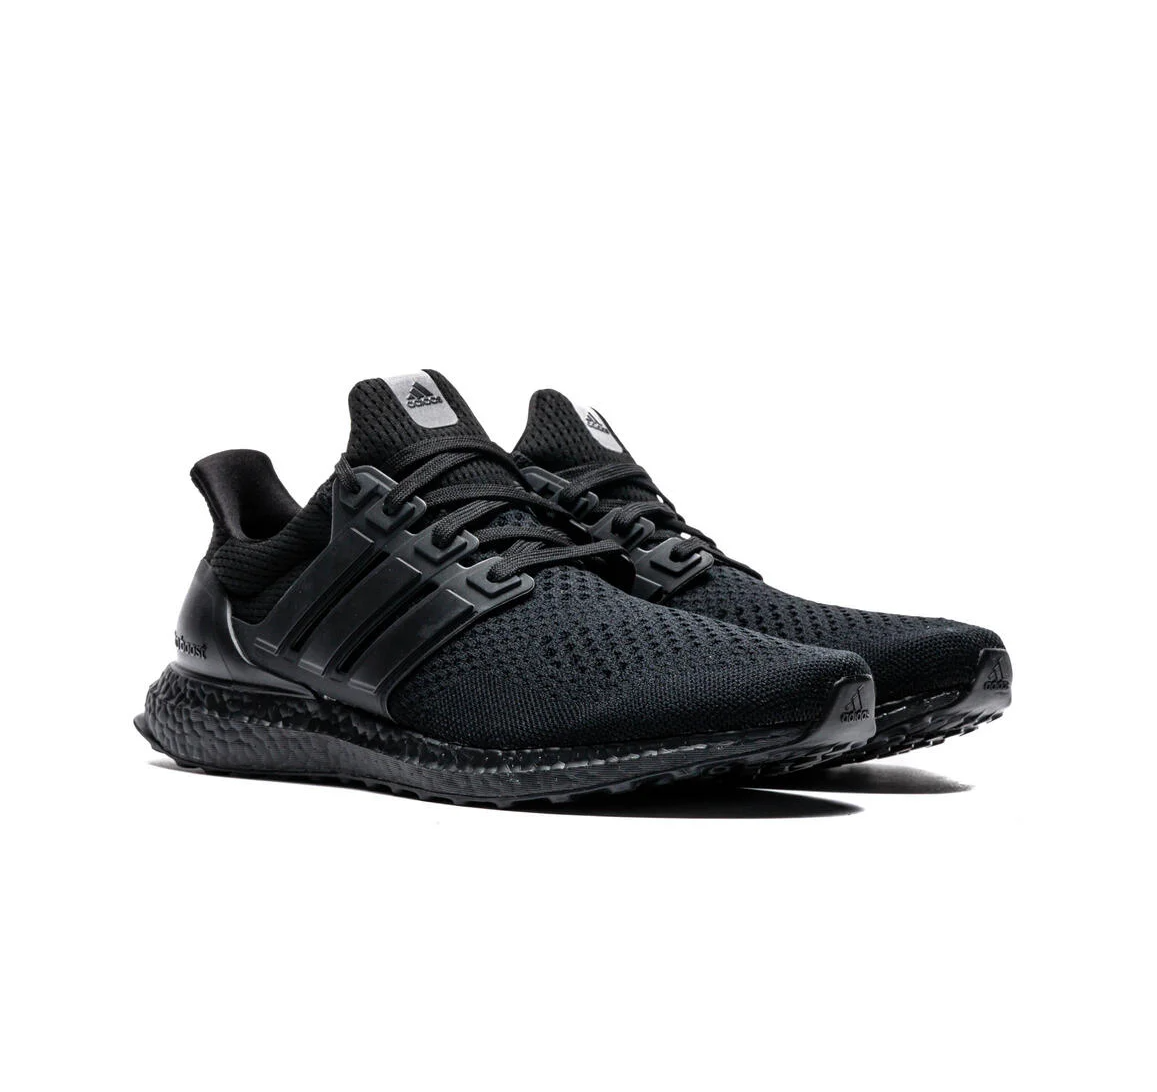 Now Available: adidas UltraBOOST 1.0 DNA 